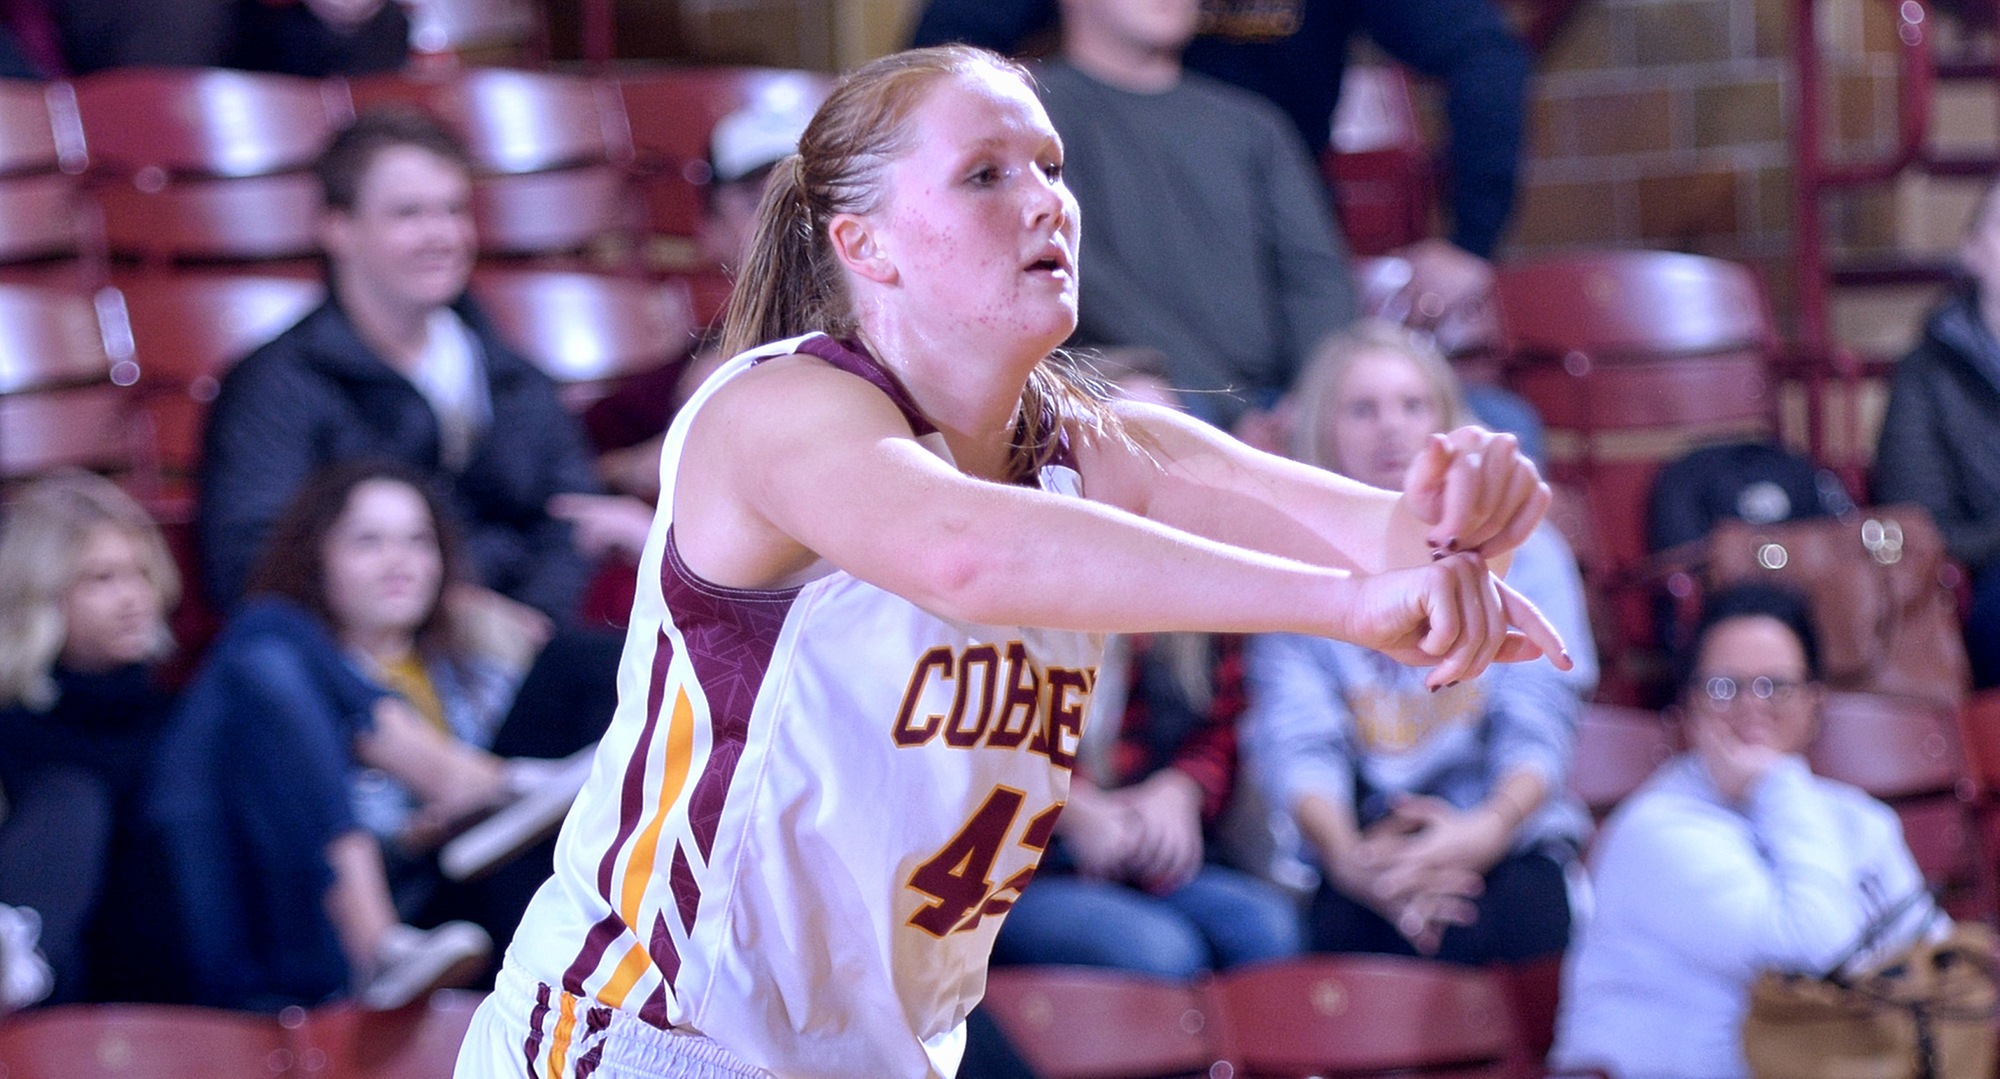 Senior Kirstin Simmons scored a career-high 17 points in the Cobbers' non-conference win at St. Benedict.